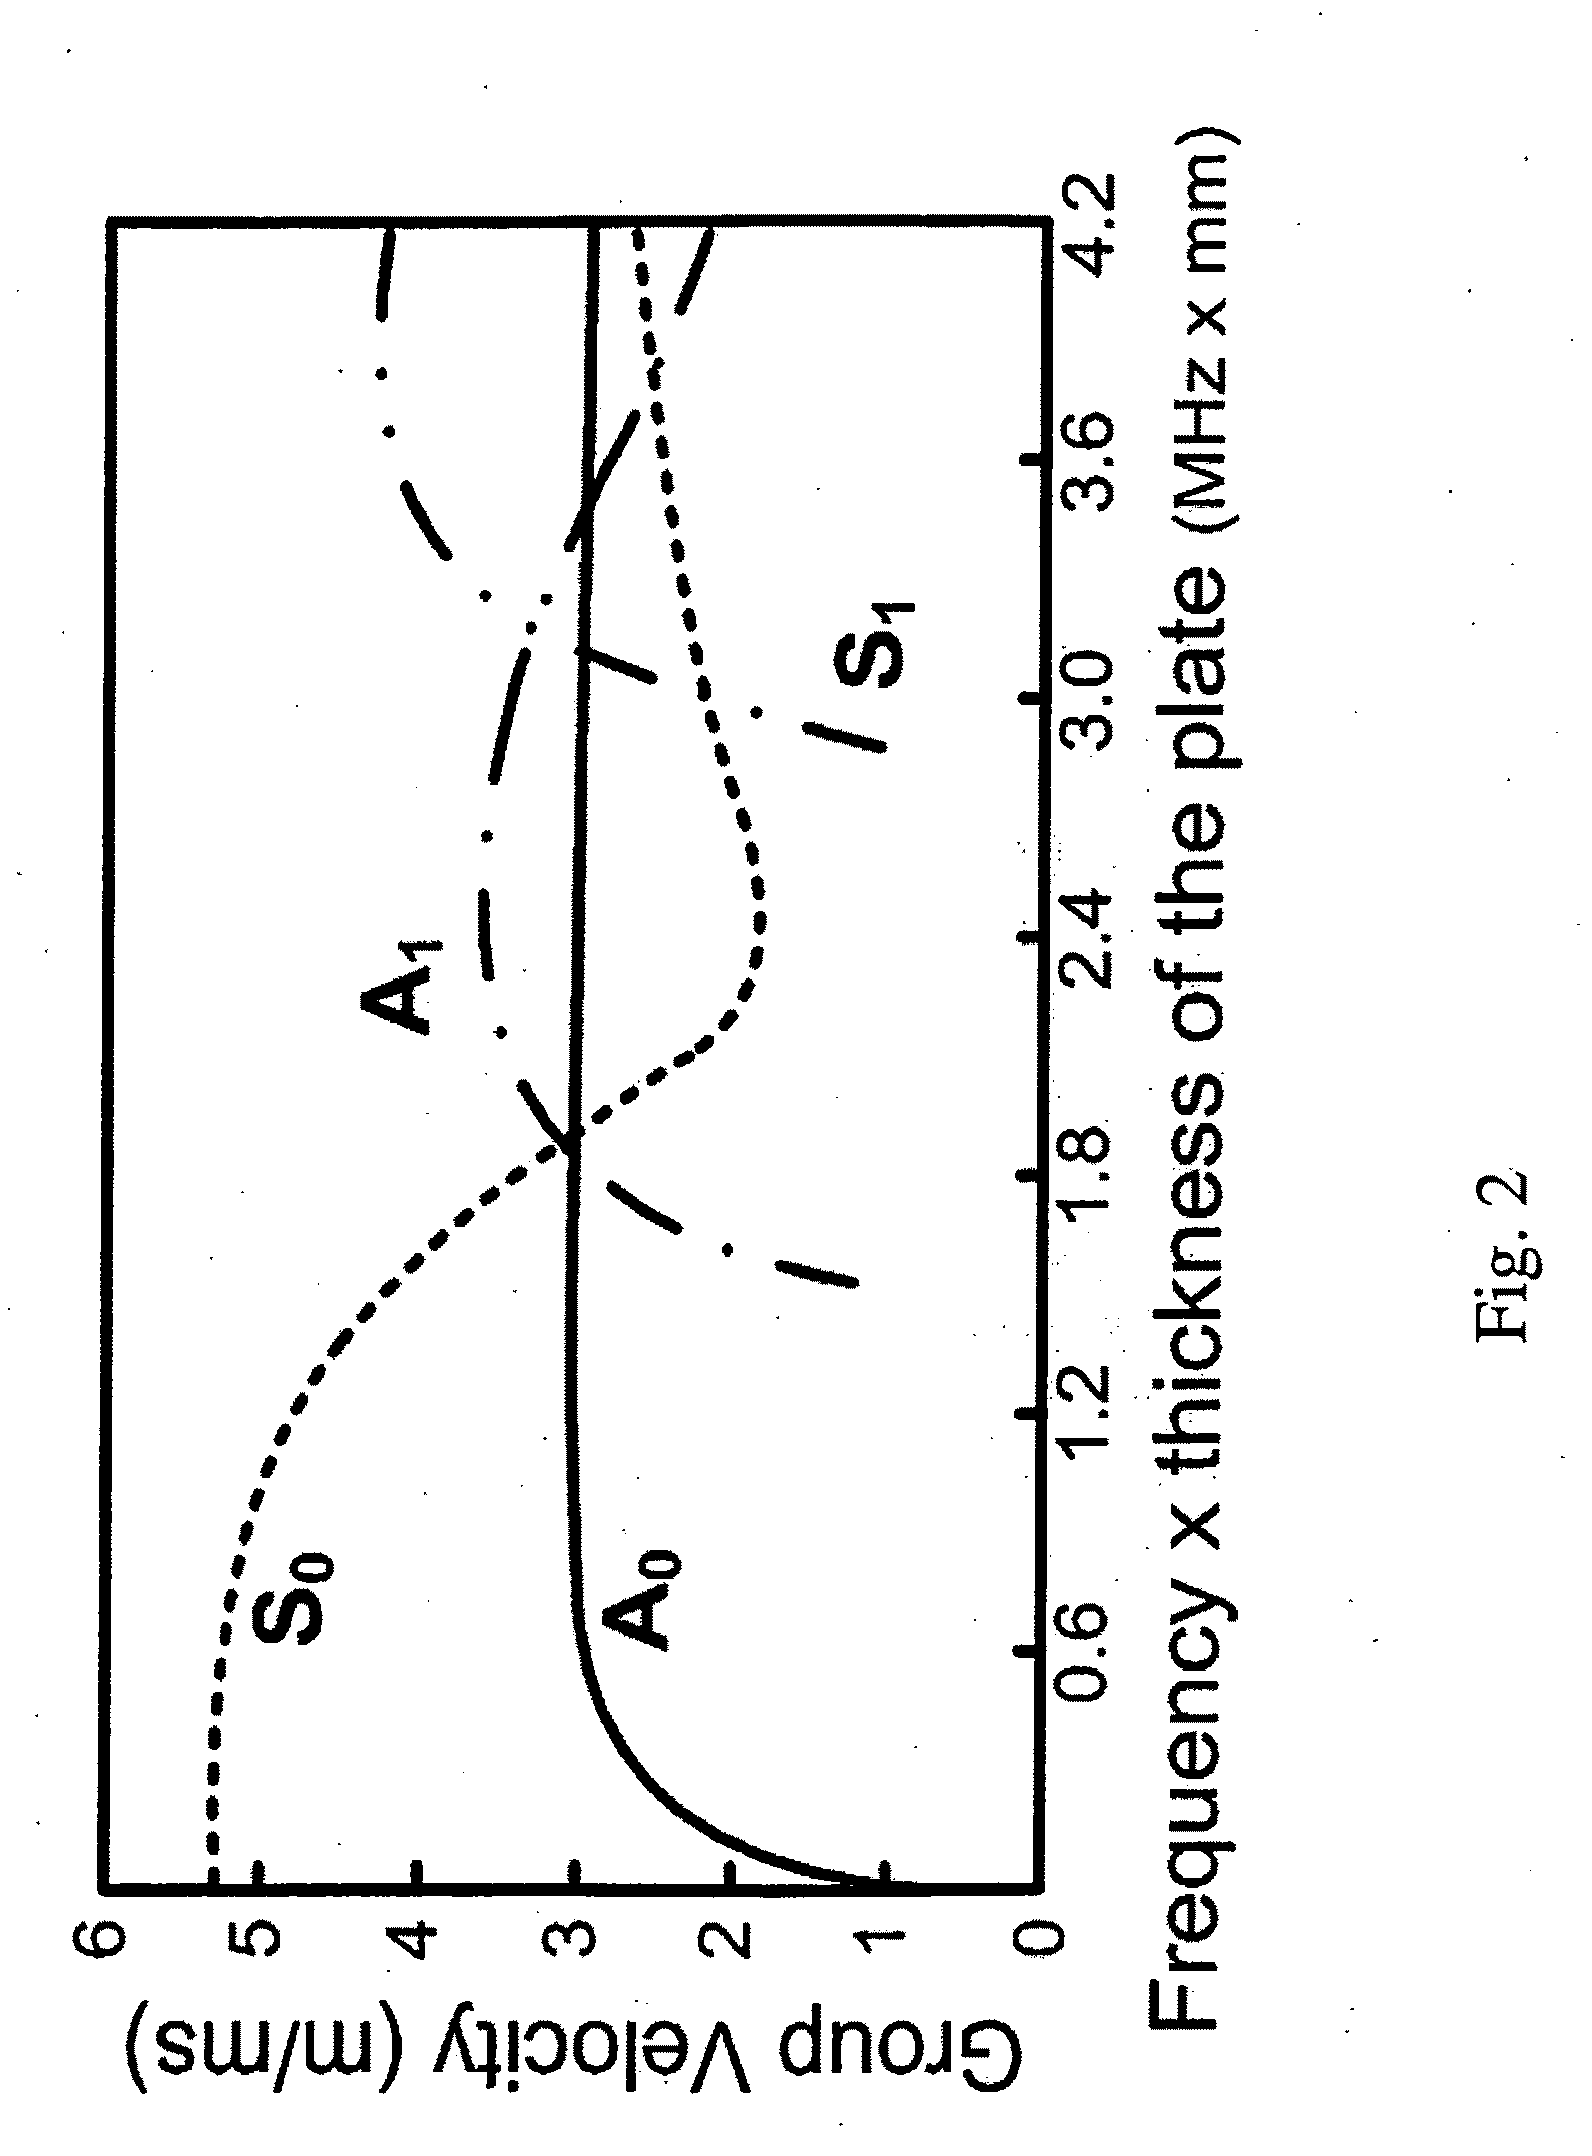 Methods, Apparatuses, and Systems for Damage Detection